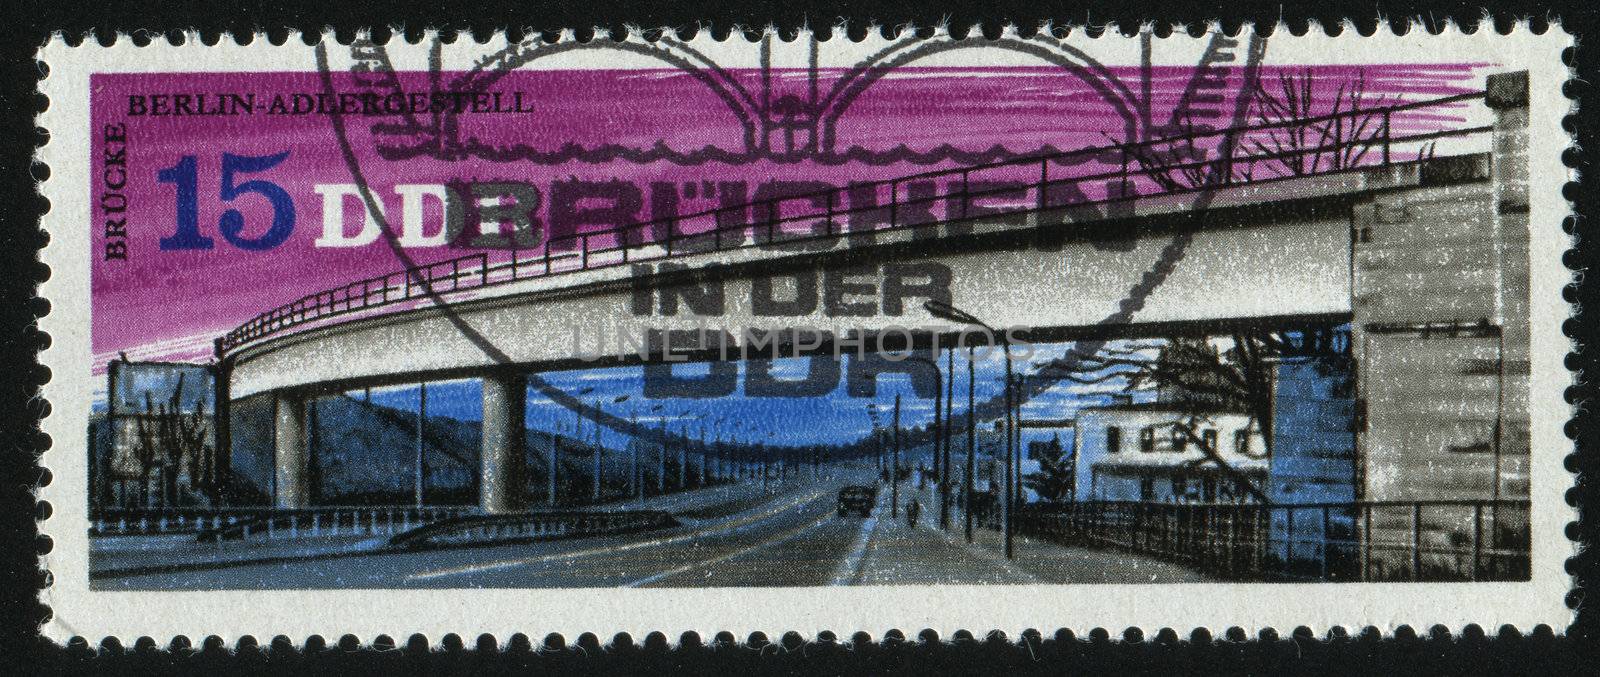 GERMANY- CIRCA 1976: stamp printed by Germany, shows Overpass, Berlin-Adlergestell, circa 1976.